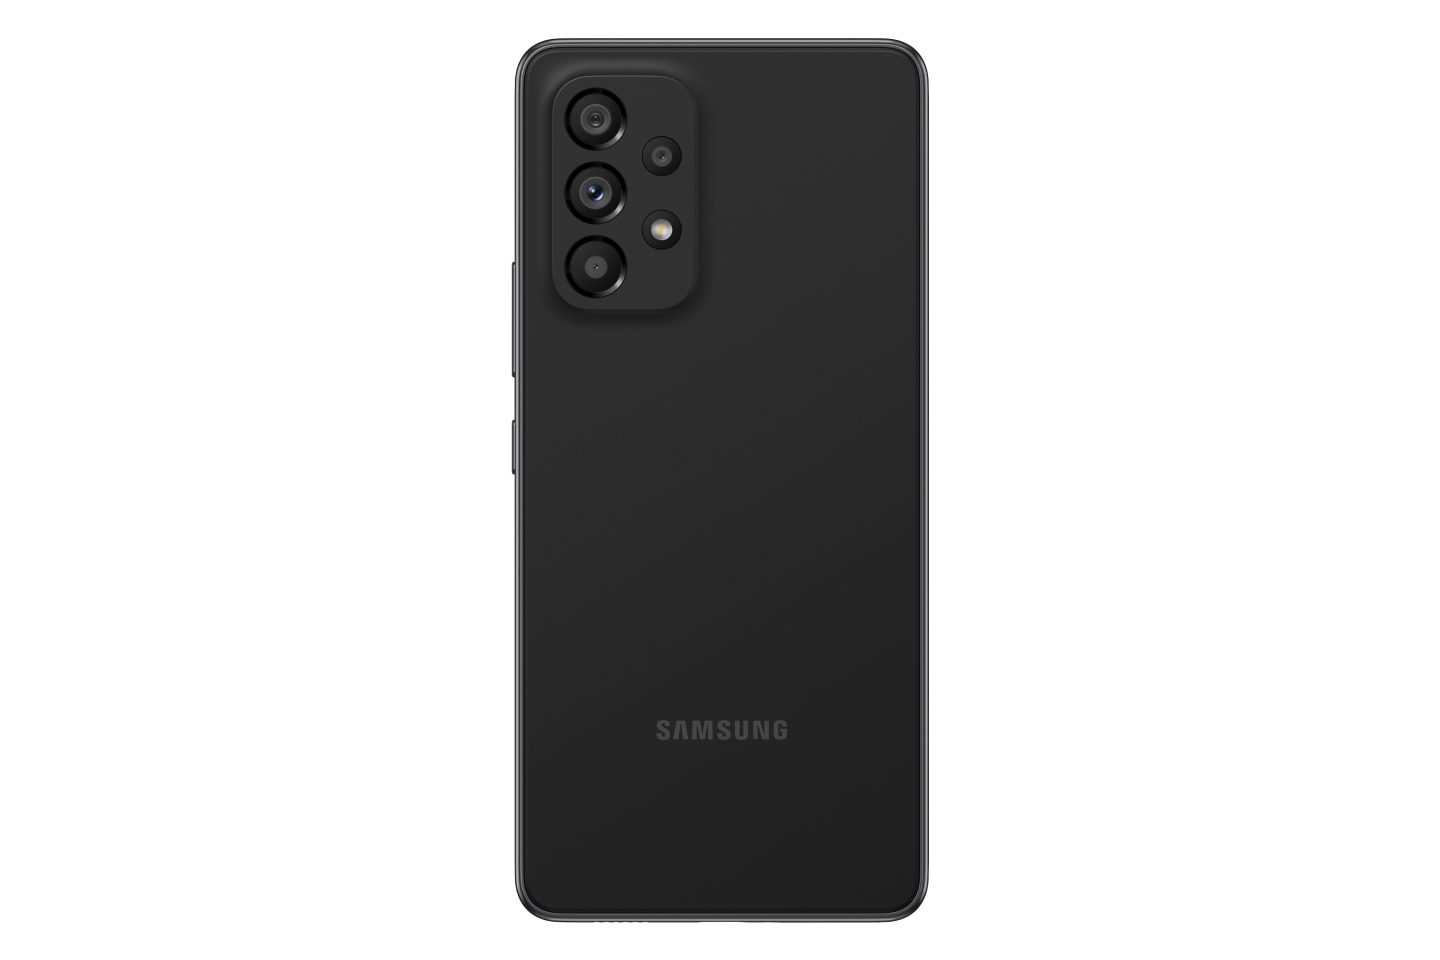 Samsung Galaxy A53 ( Black ) 5G Smartphone with 6.5" Super AMOLED Display, 120Hz Refresh Rate, Android 12, MicroSD Slot Up to 1TB, 5000 mAh Battery